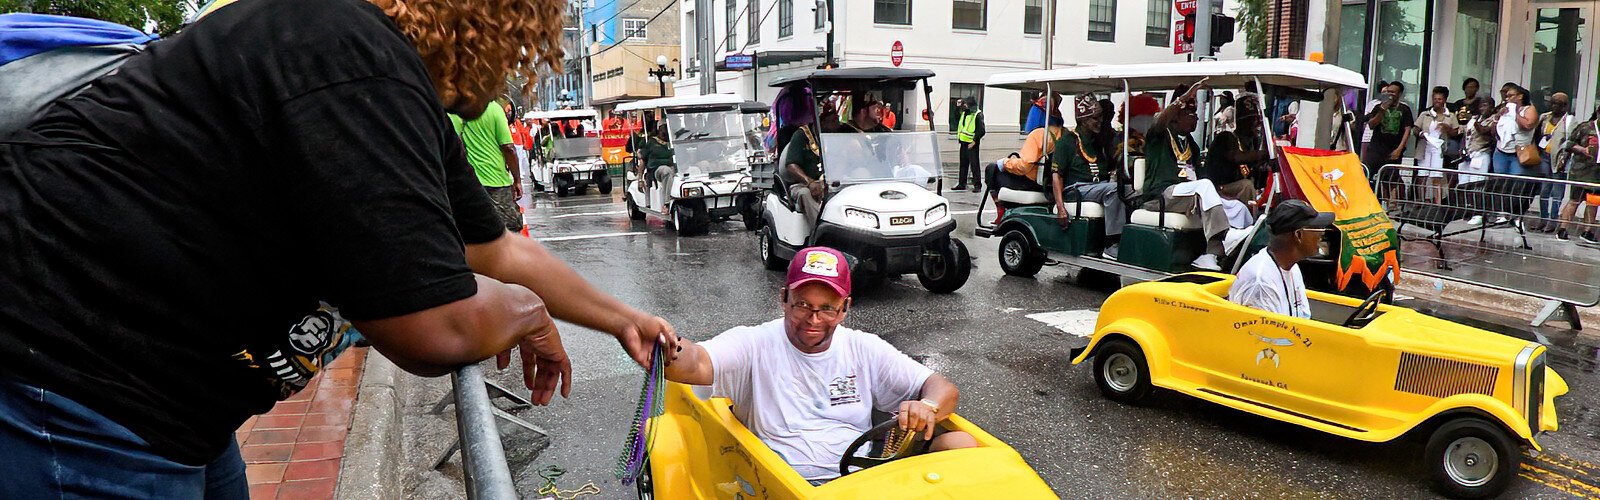 A member of the Omar Temple No. 21 from Savannah GA. hands out beads to a parade watcher from his tiny yellow vehicle, an entertaining distinction special to the Shriners.